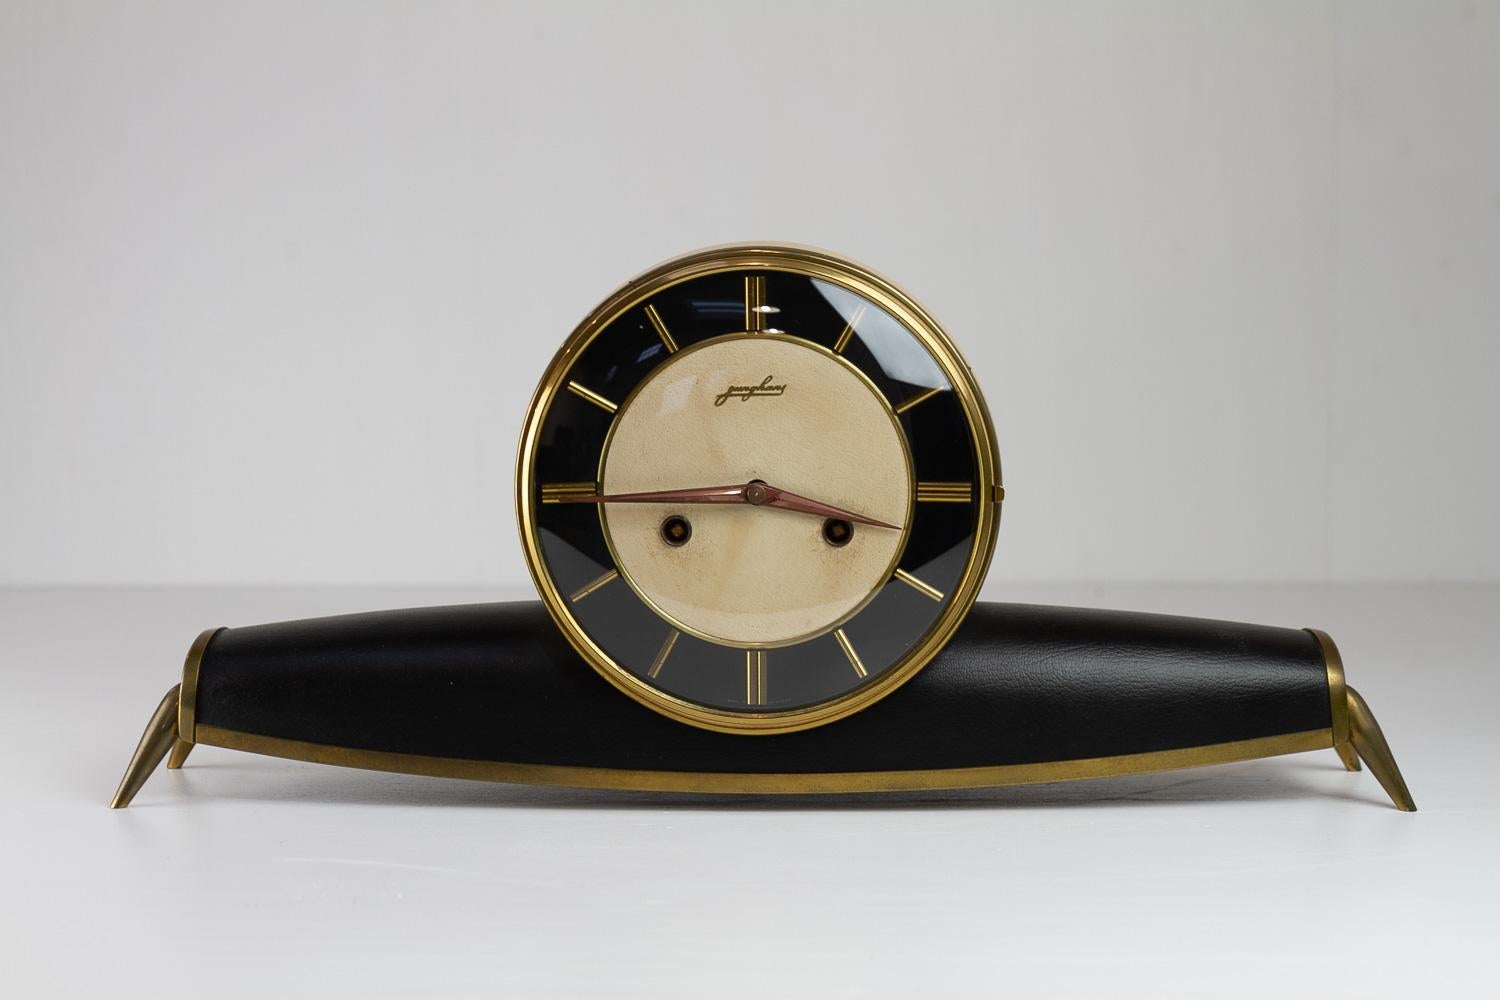 Junghans Mid-Century Modern Mantel Clock, 1950s.
Very elegant Mid-Century modern mantel clock made by Junghans in the 1950s with design elements from Art Deco. White and black faux leather and brass frame and legs.
Lovely chime, which is easily